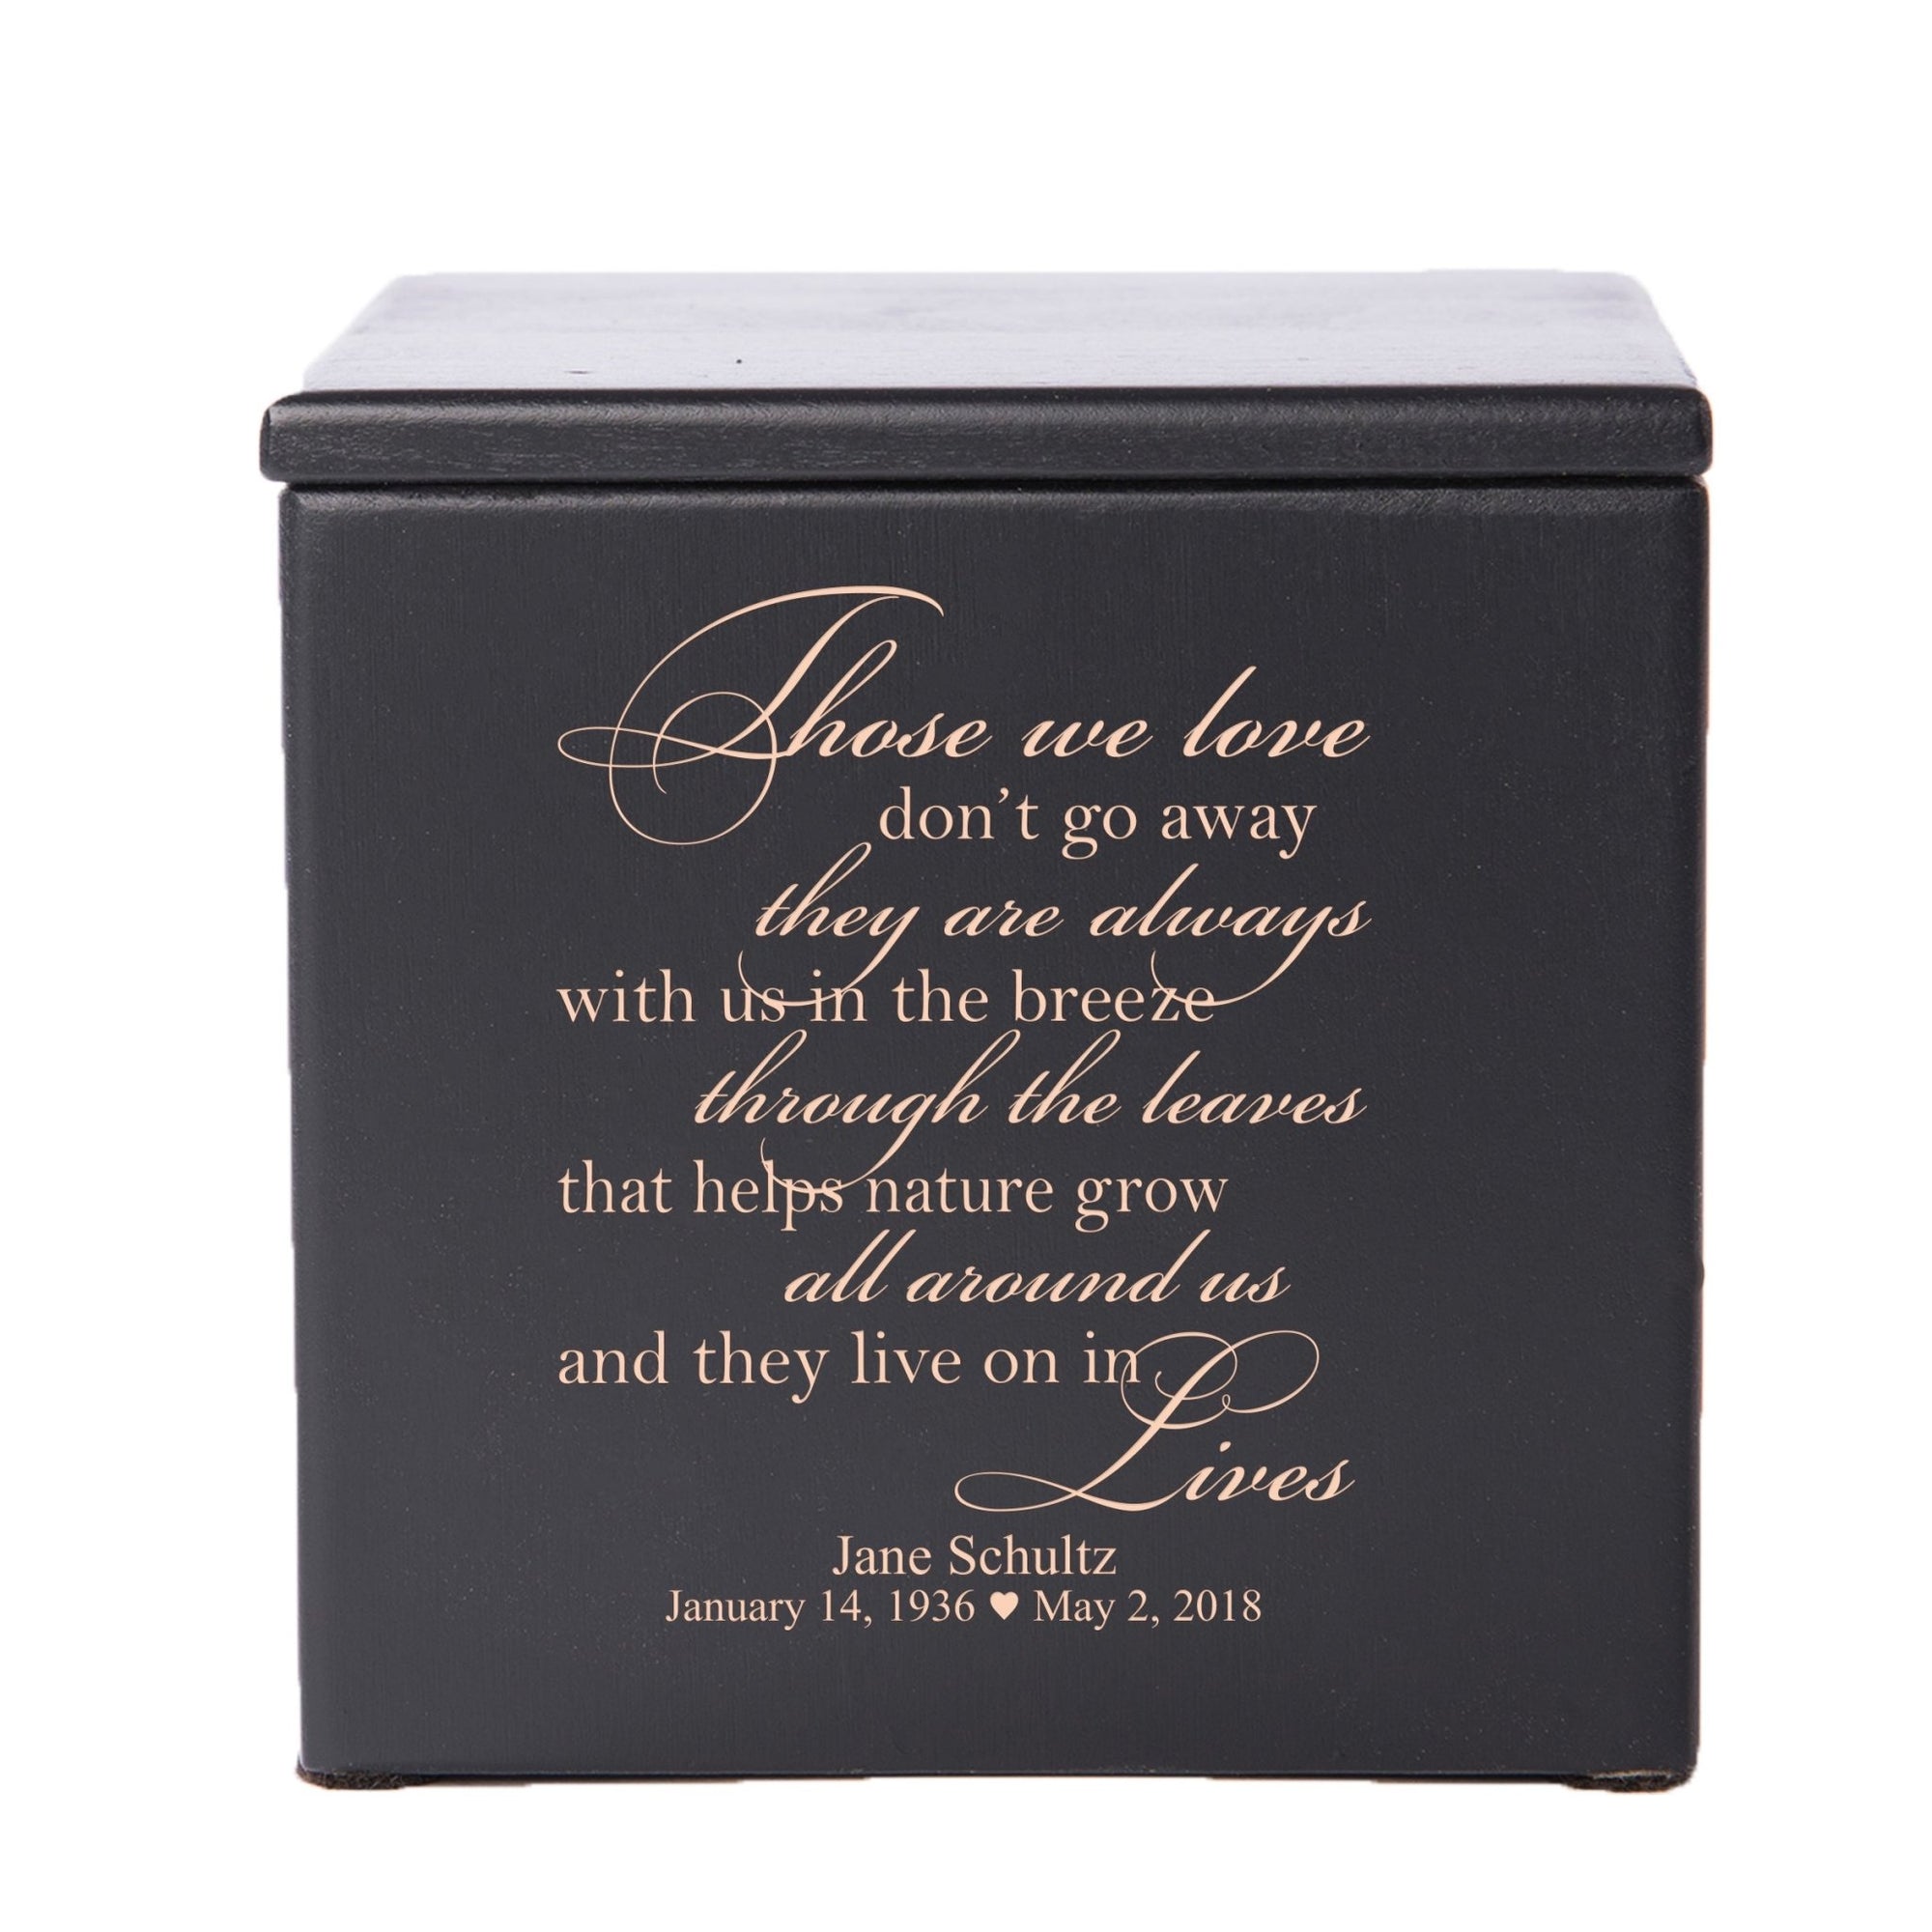 Custom Wooden Cremation Urn for Human Ashes holds 49 cu in Those Who We Love - LifeSong Milestones